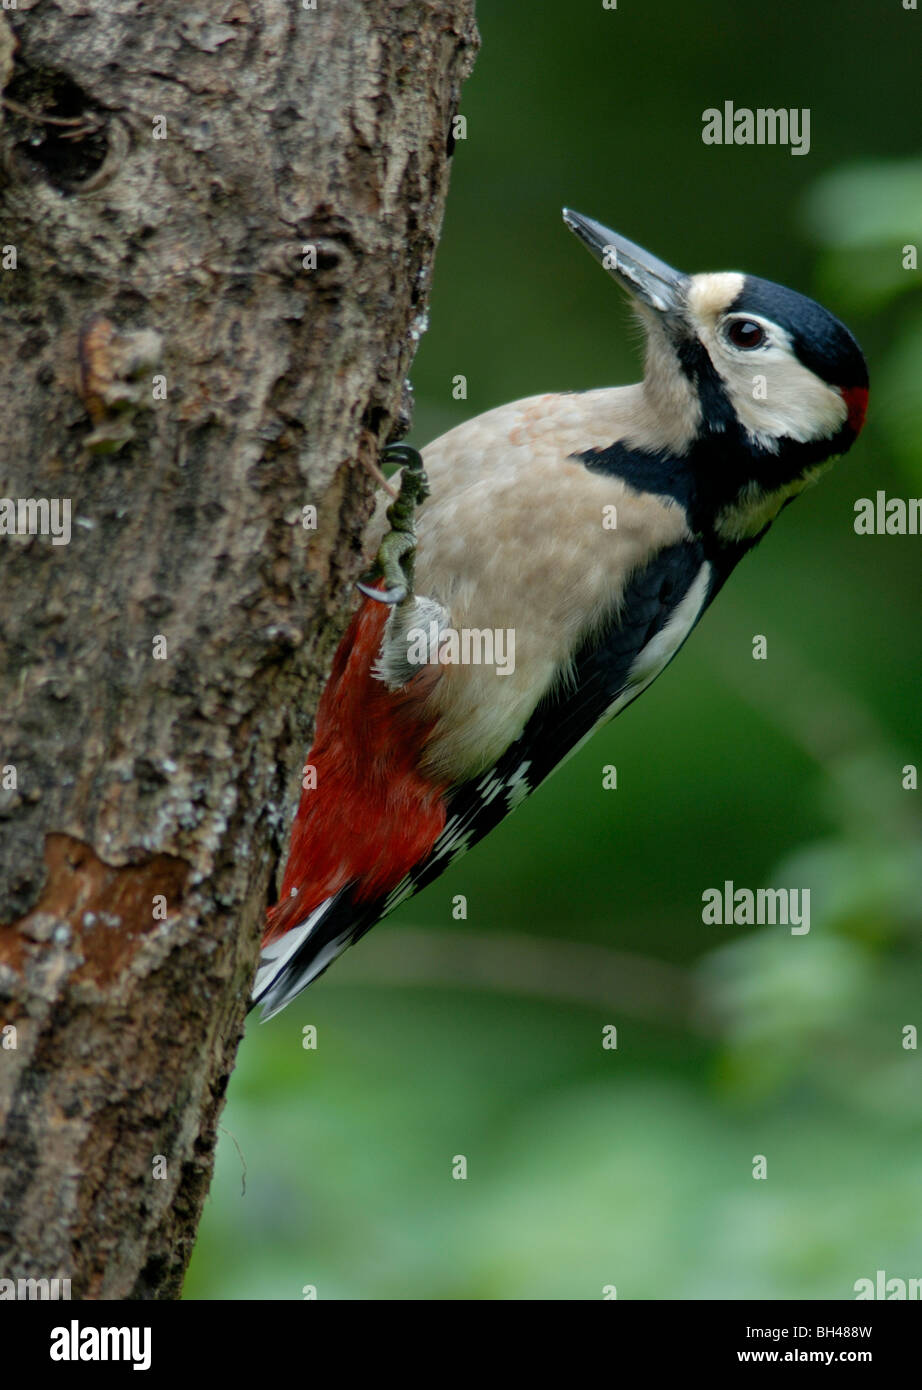 Great spotted woodpecker (Dendrocopos major) searching for insects in trunk of tree Stock Photo